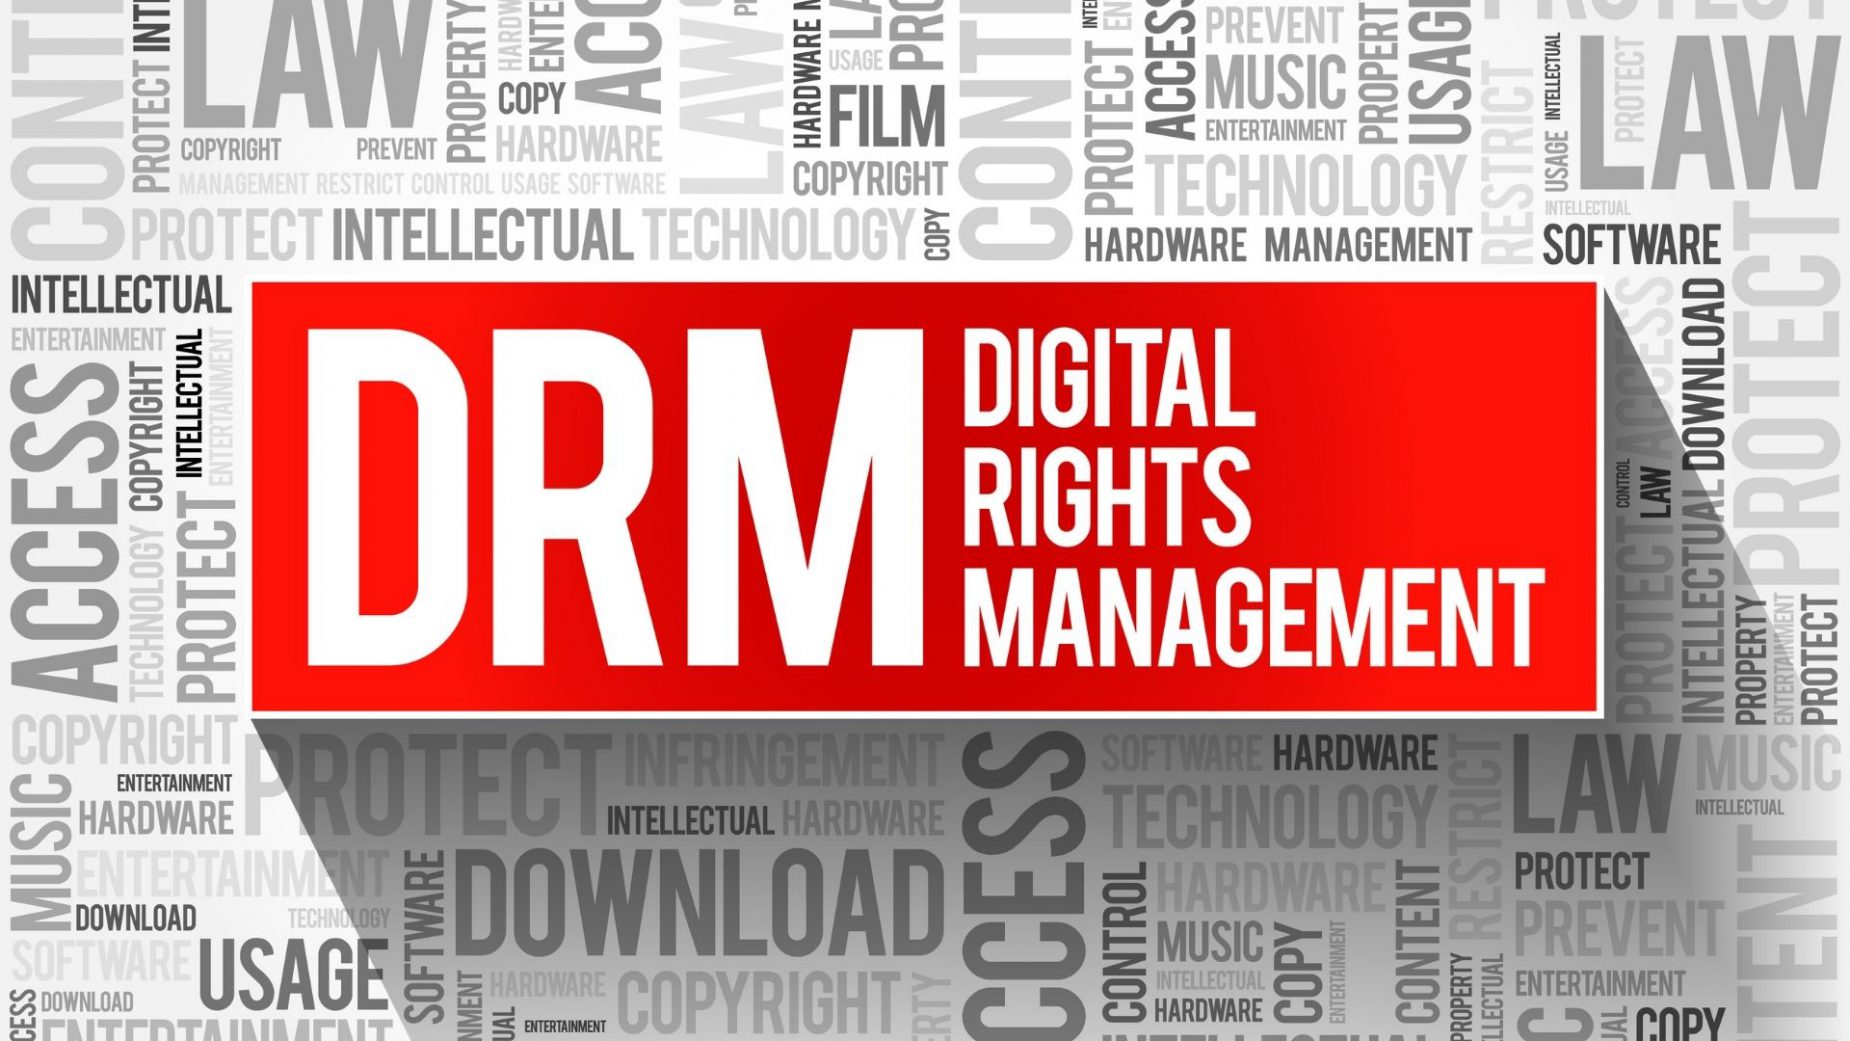 Global Digital Rights Management Market Overview And Prospects